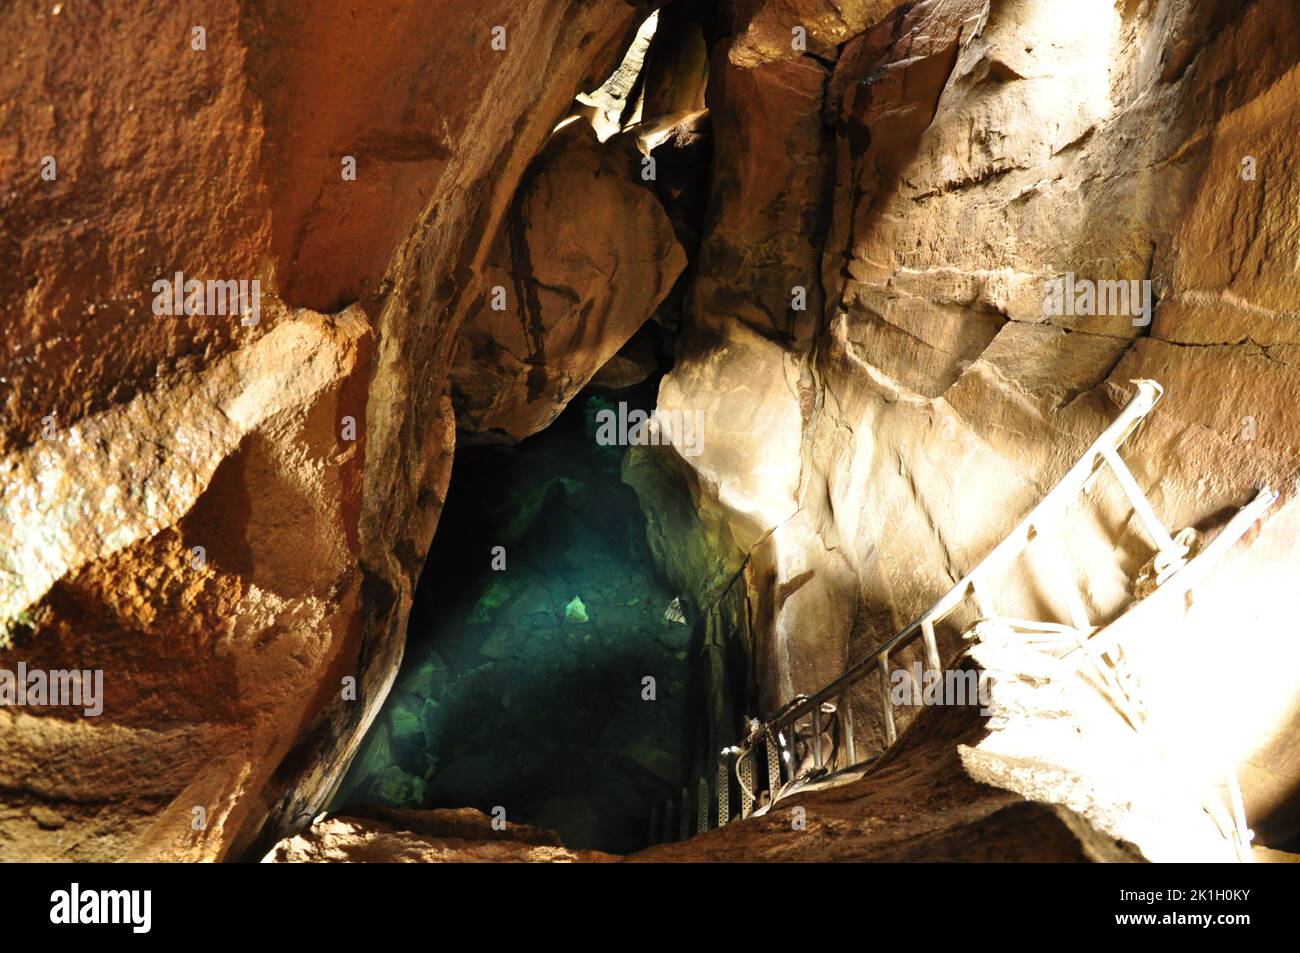 A scenic view of Grjotagja cave in Iceland Stock Photo